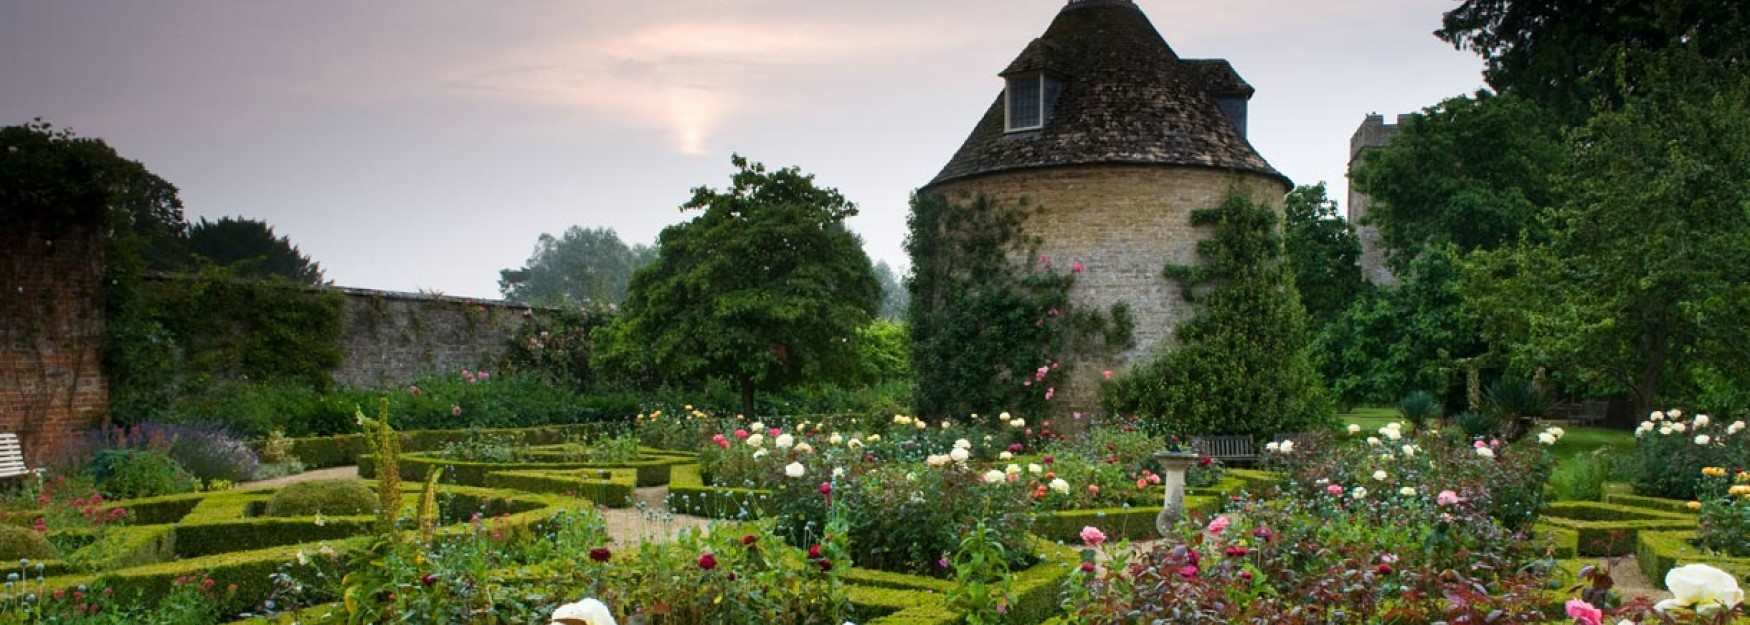 The dovecote surrounded by roses at Rousham (photo Harpur Garden Images)